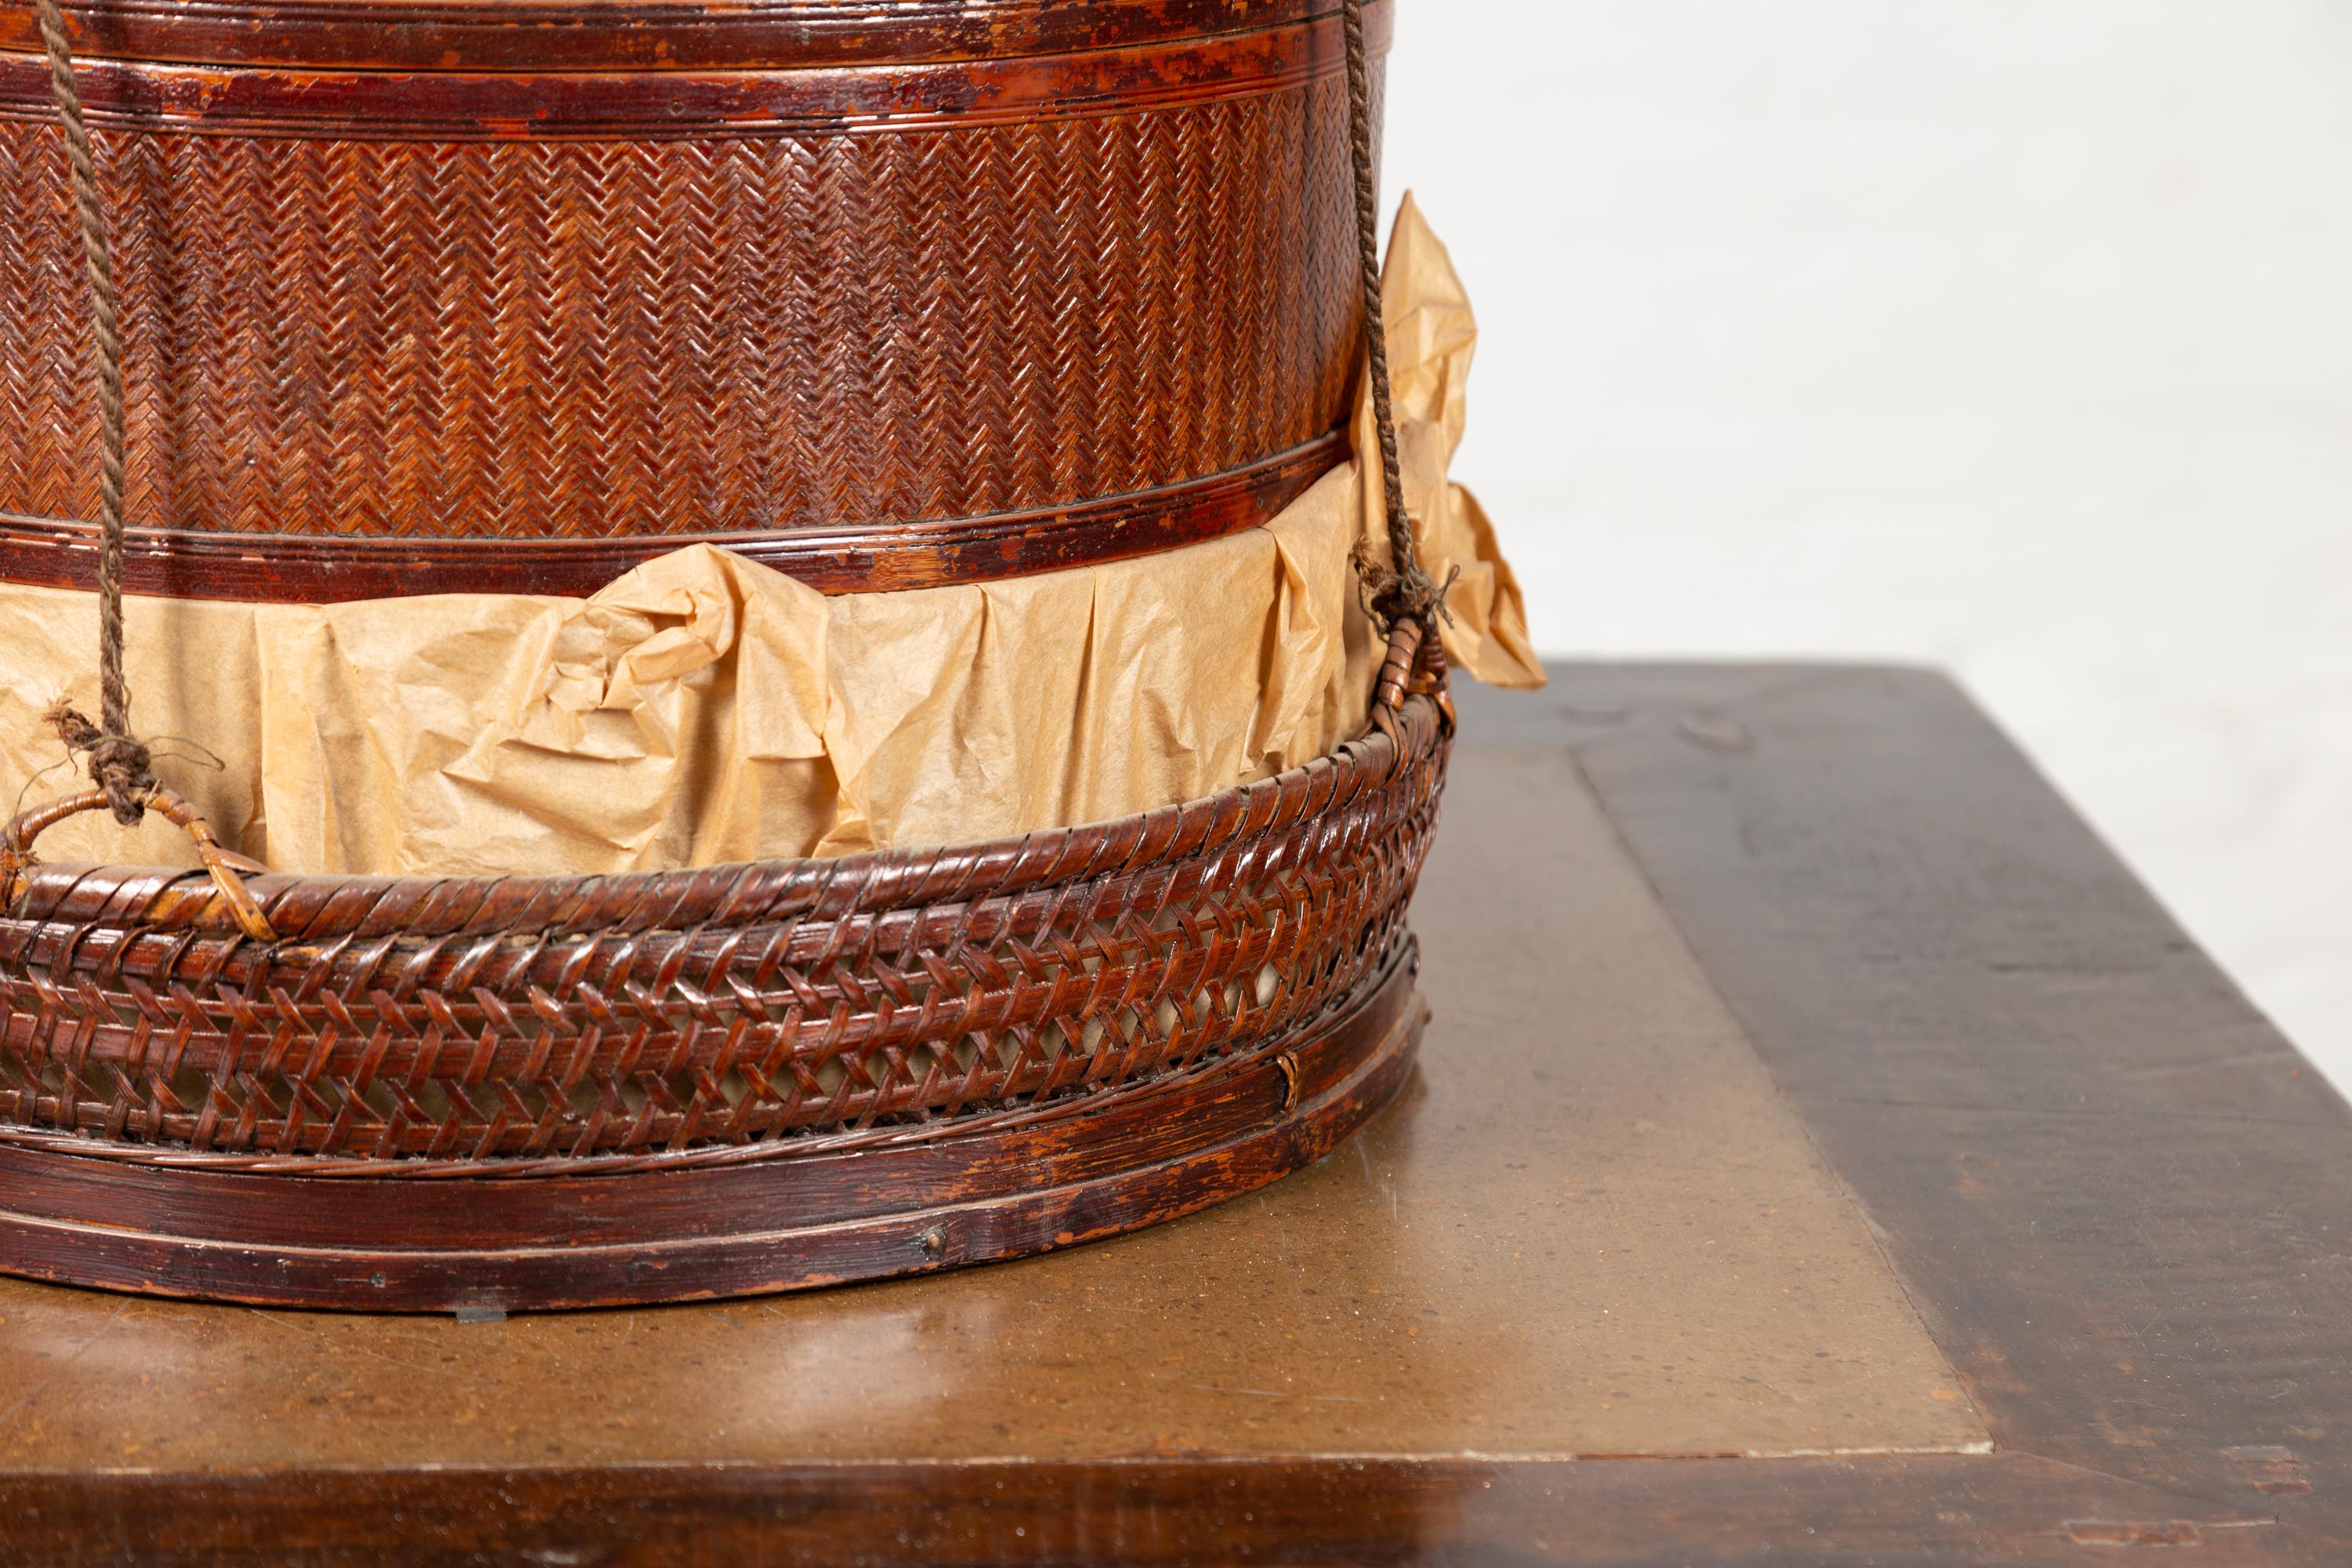 Chinese 19th Century Tiered Food Basket with Stacking Parts, Paper and Rope Ties For Sale 1